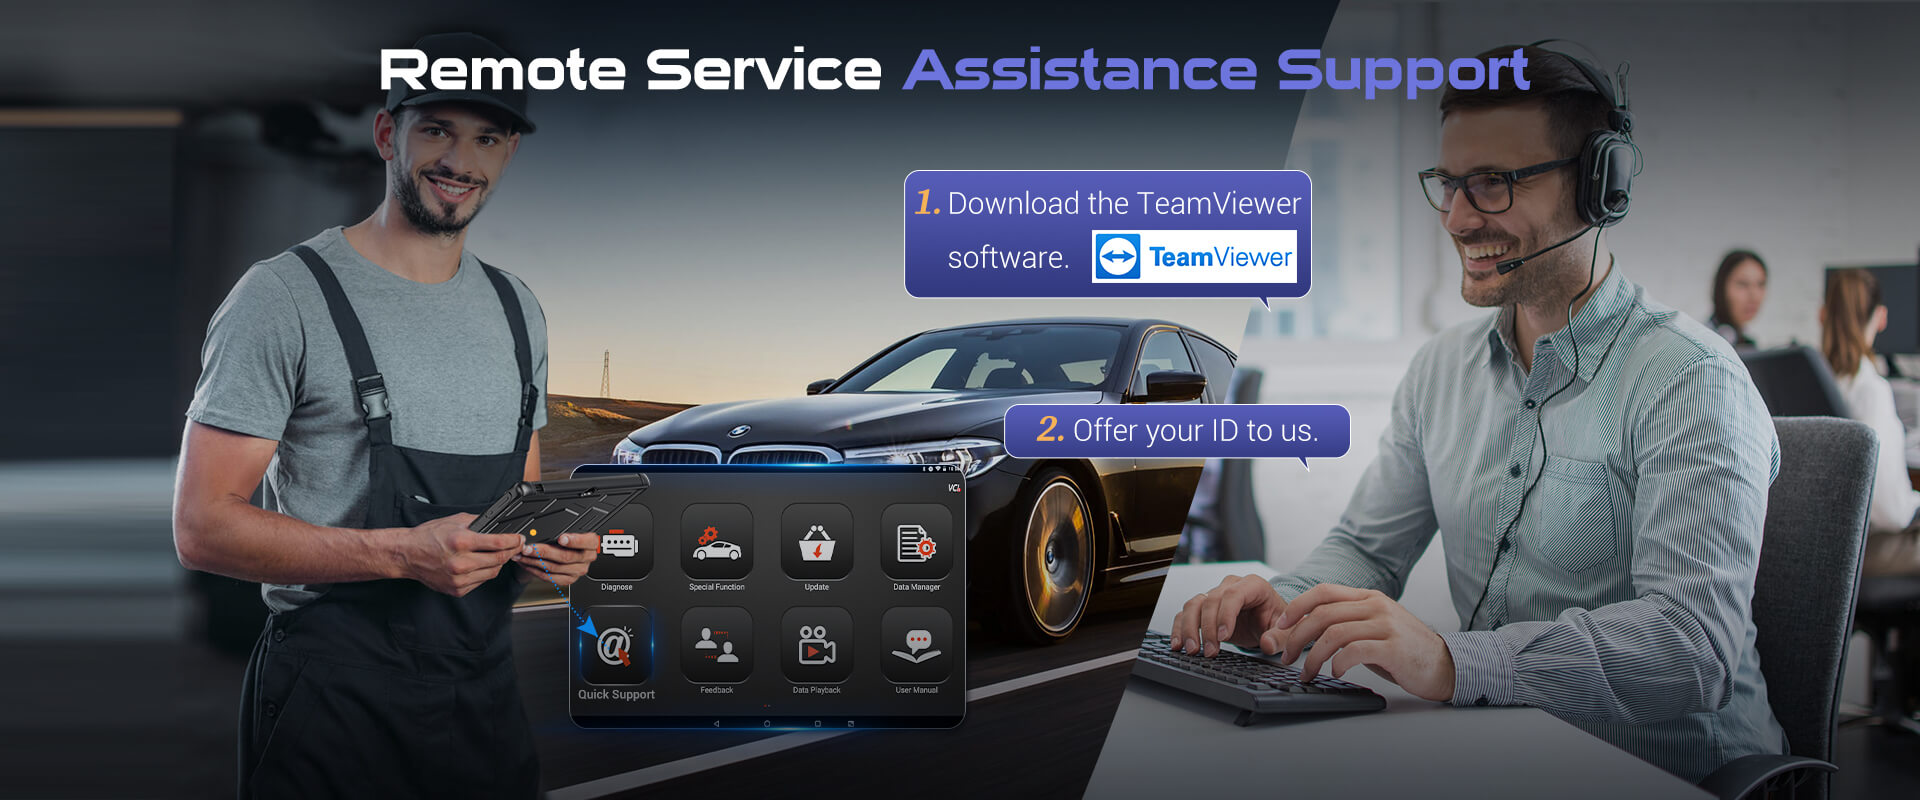 Remote Technical Support via TeamViewer